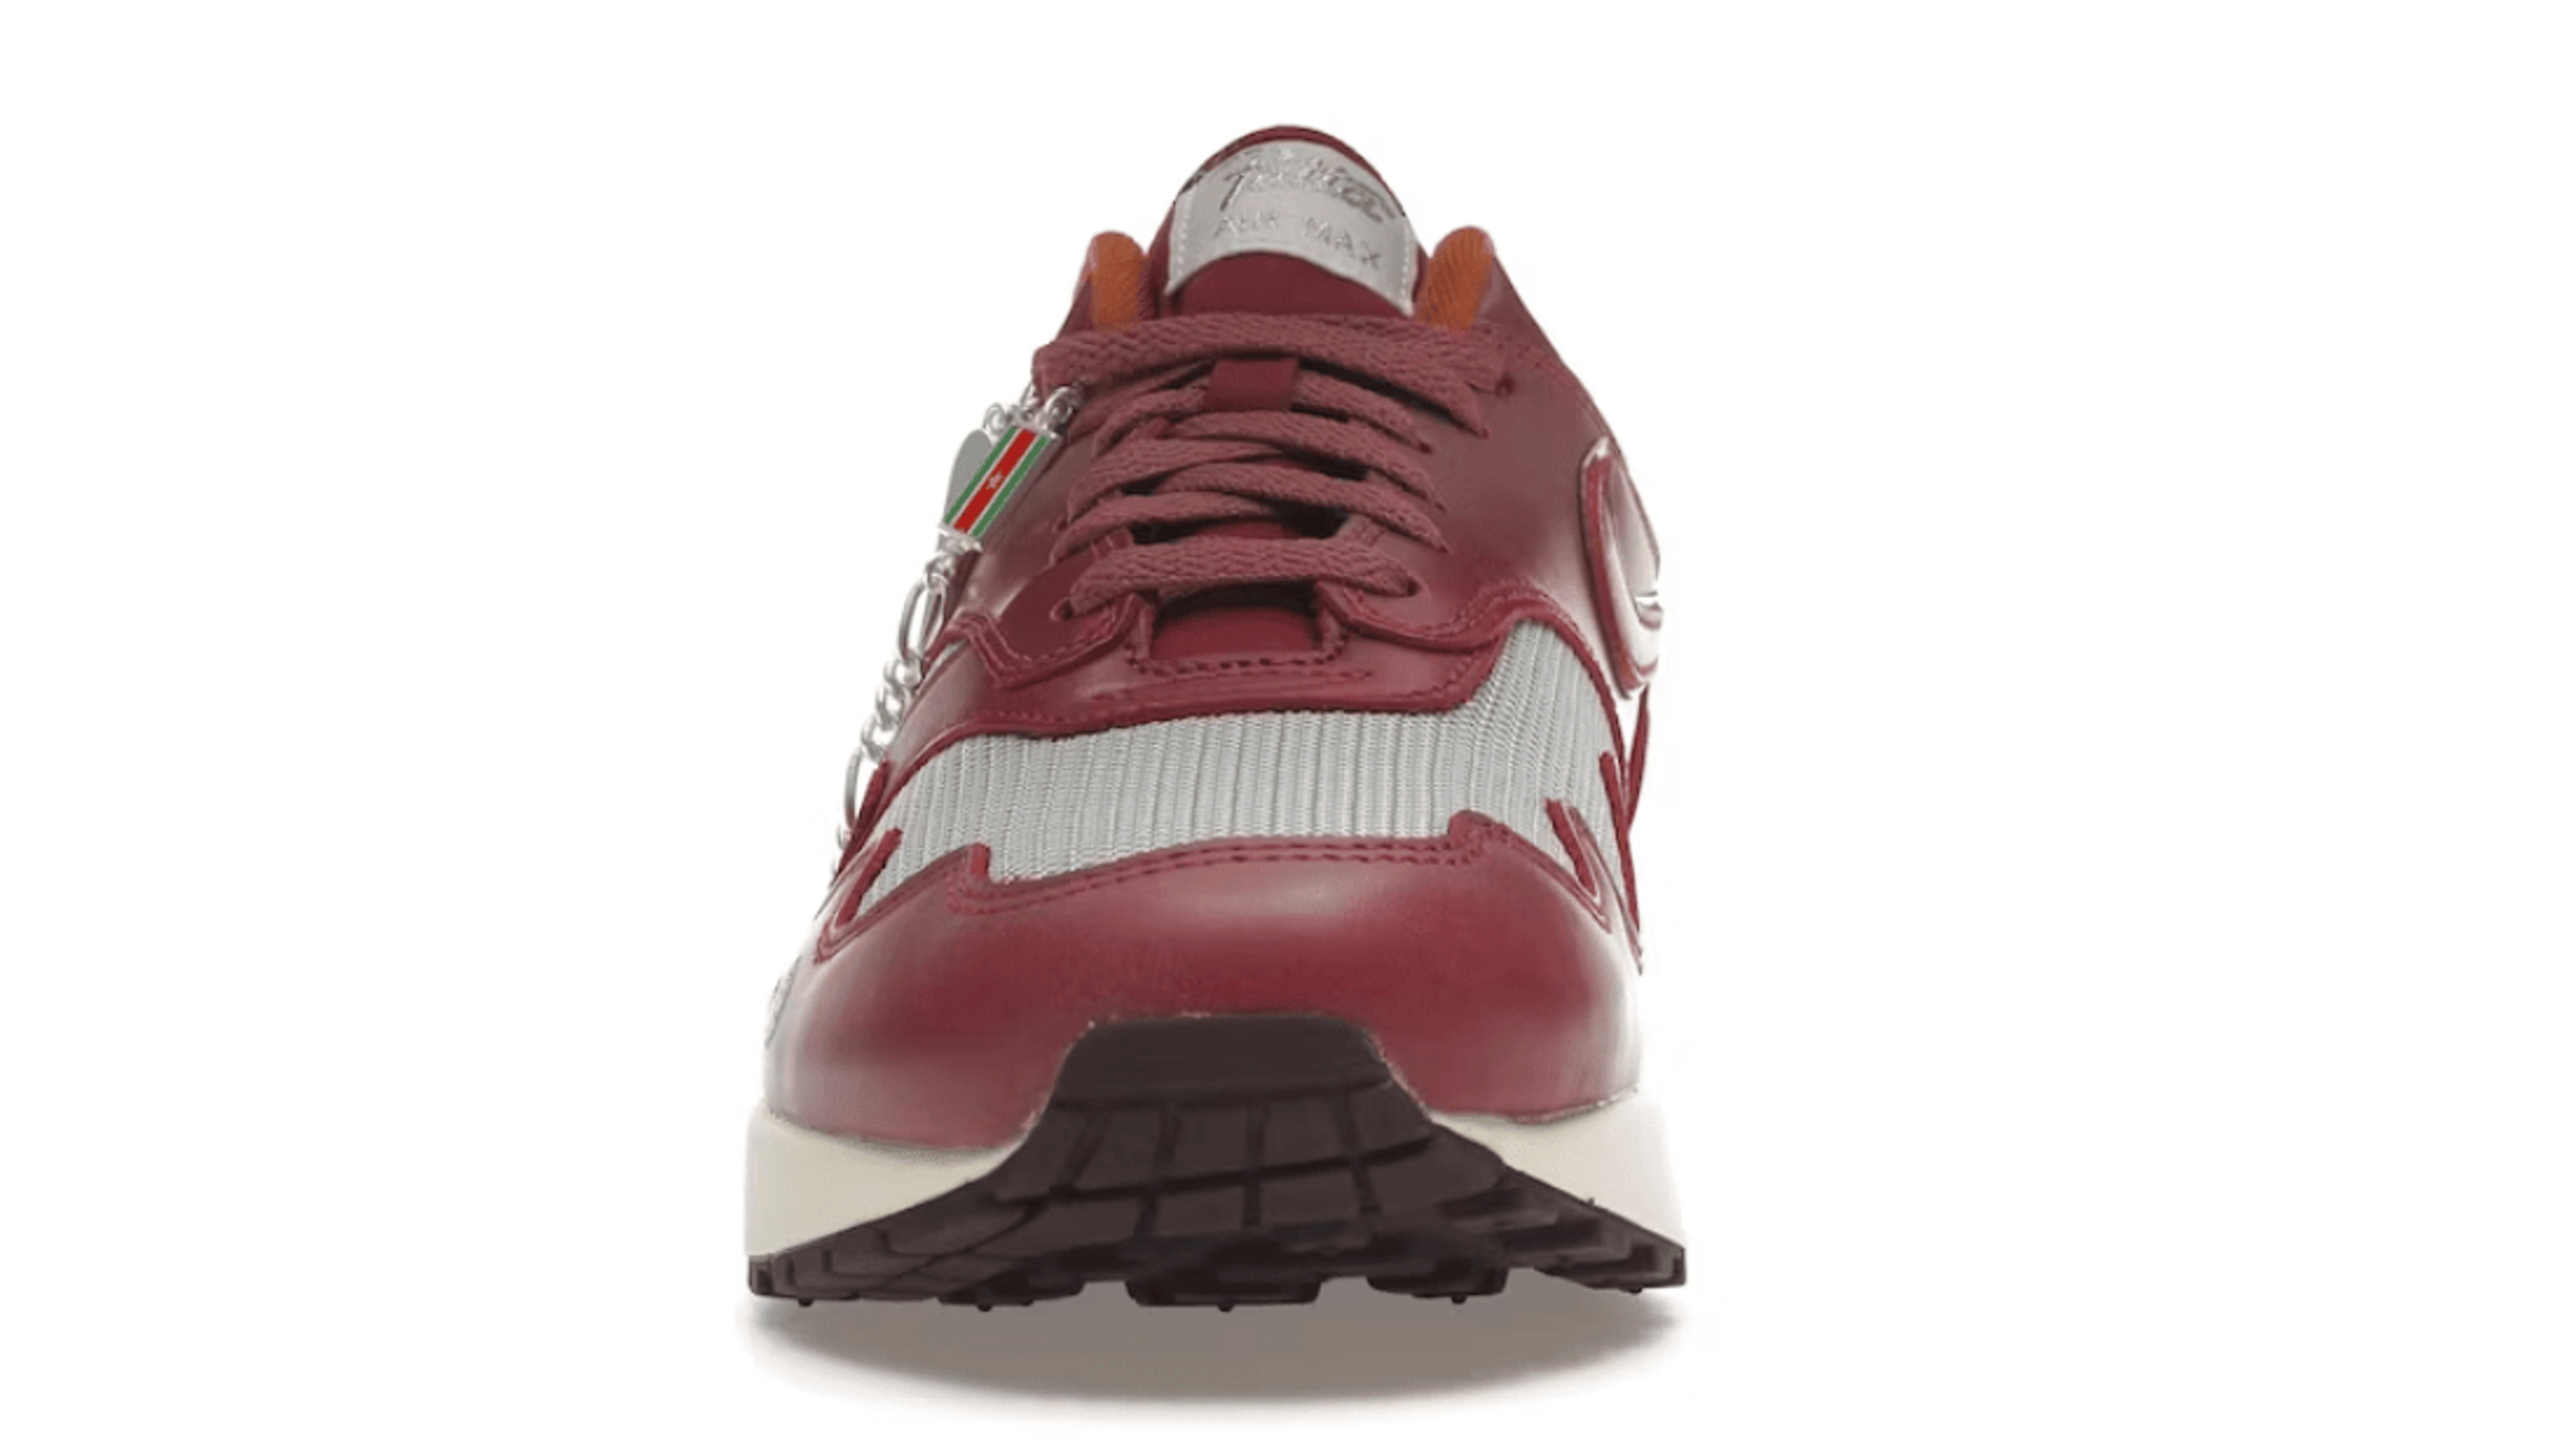 Alternate View 2 of Nike Air Max 1 Patta Waves Rush Maroon (with Bracelet)